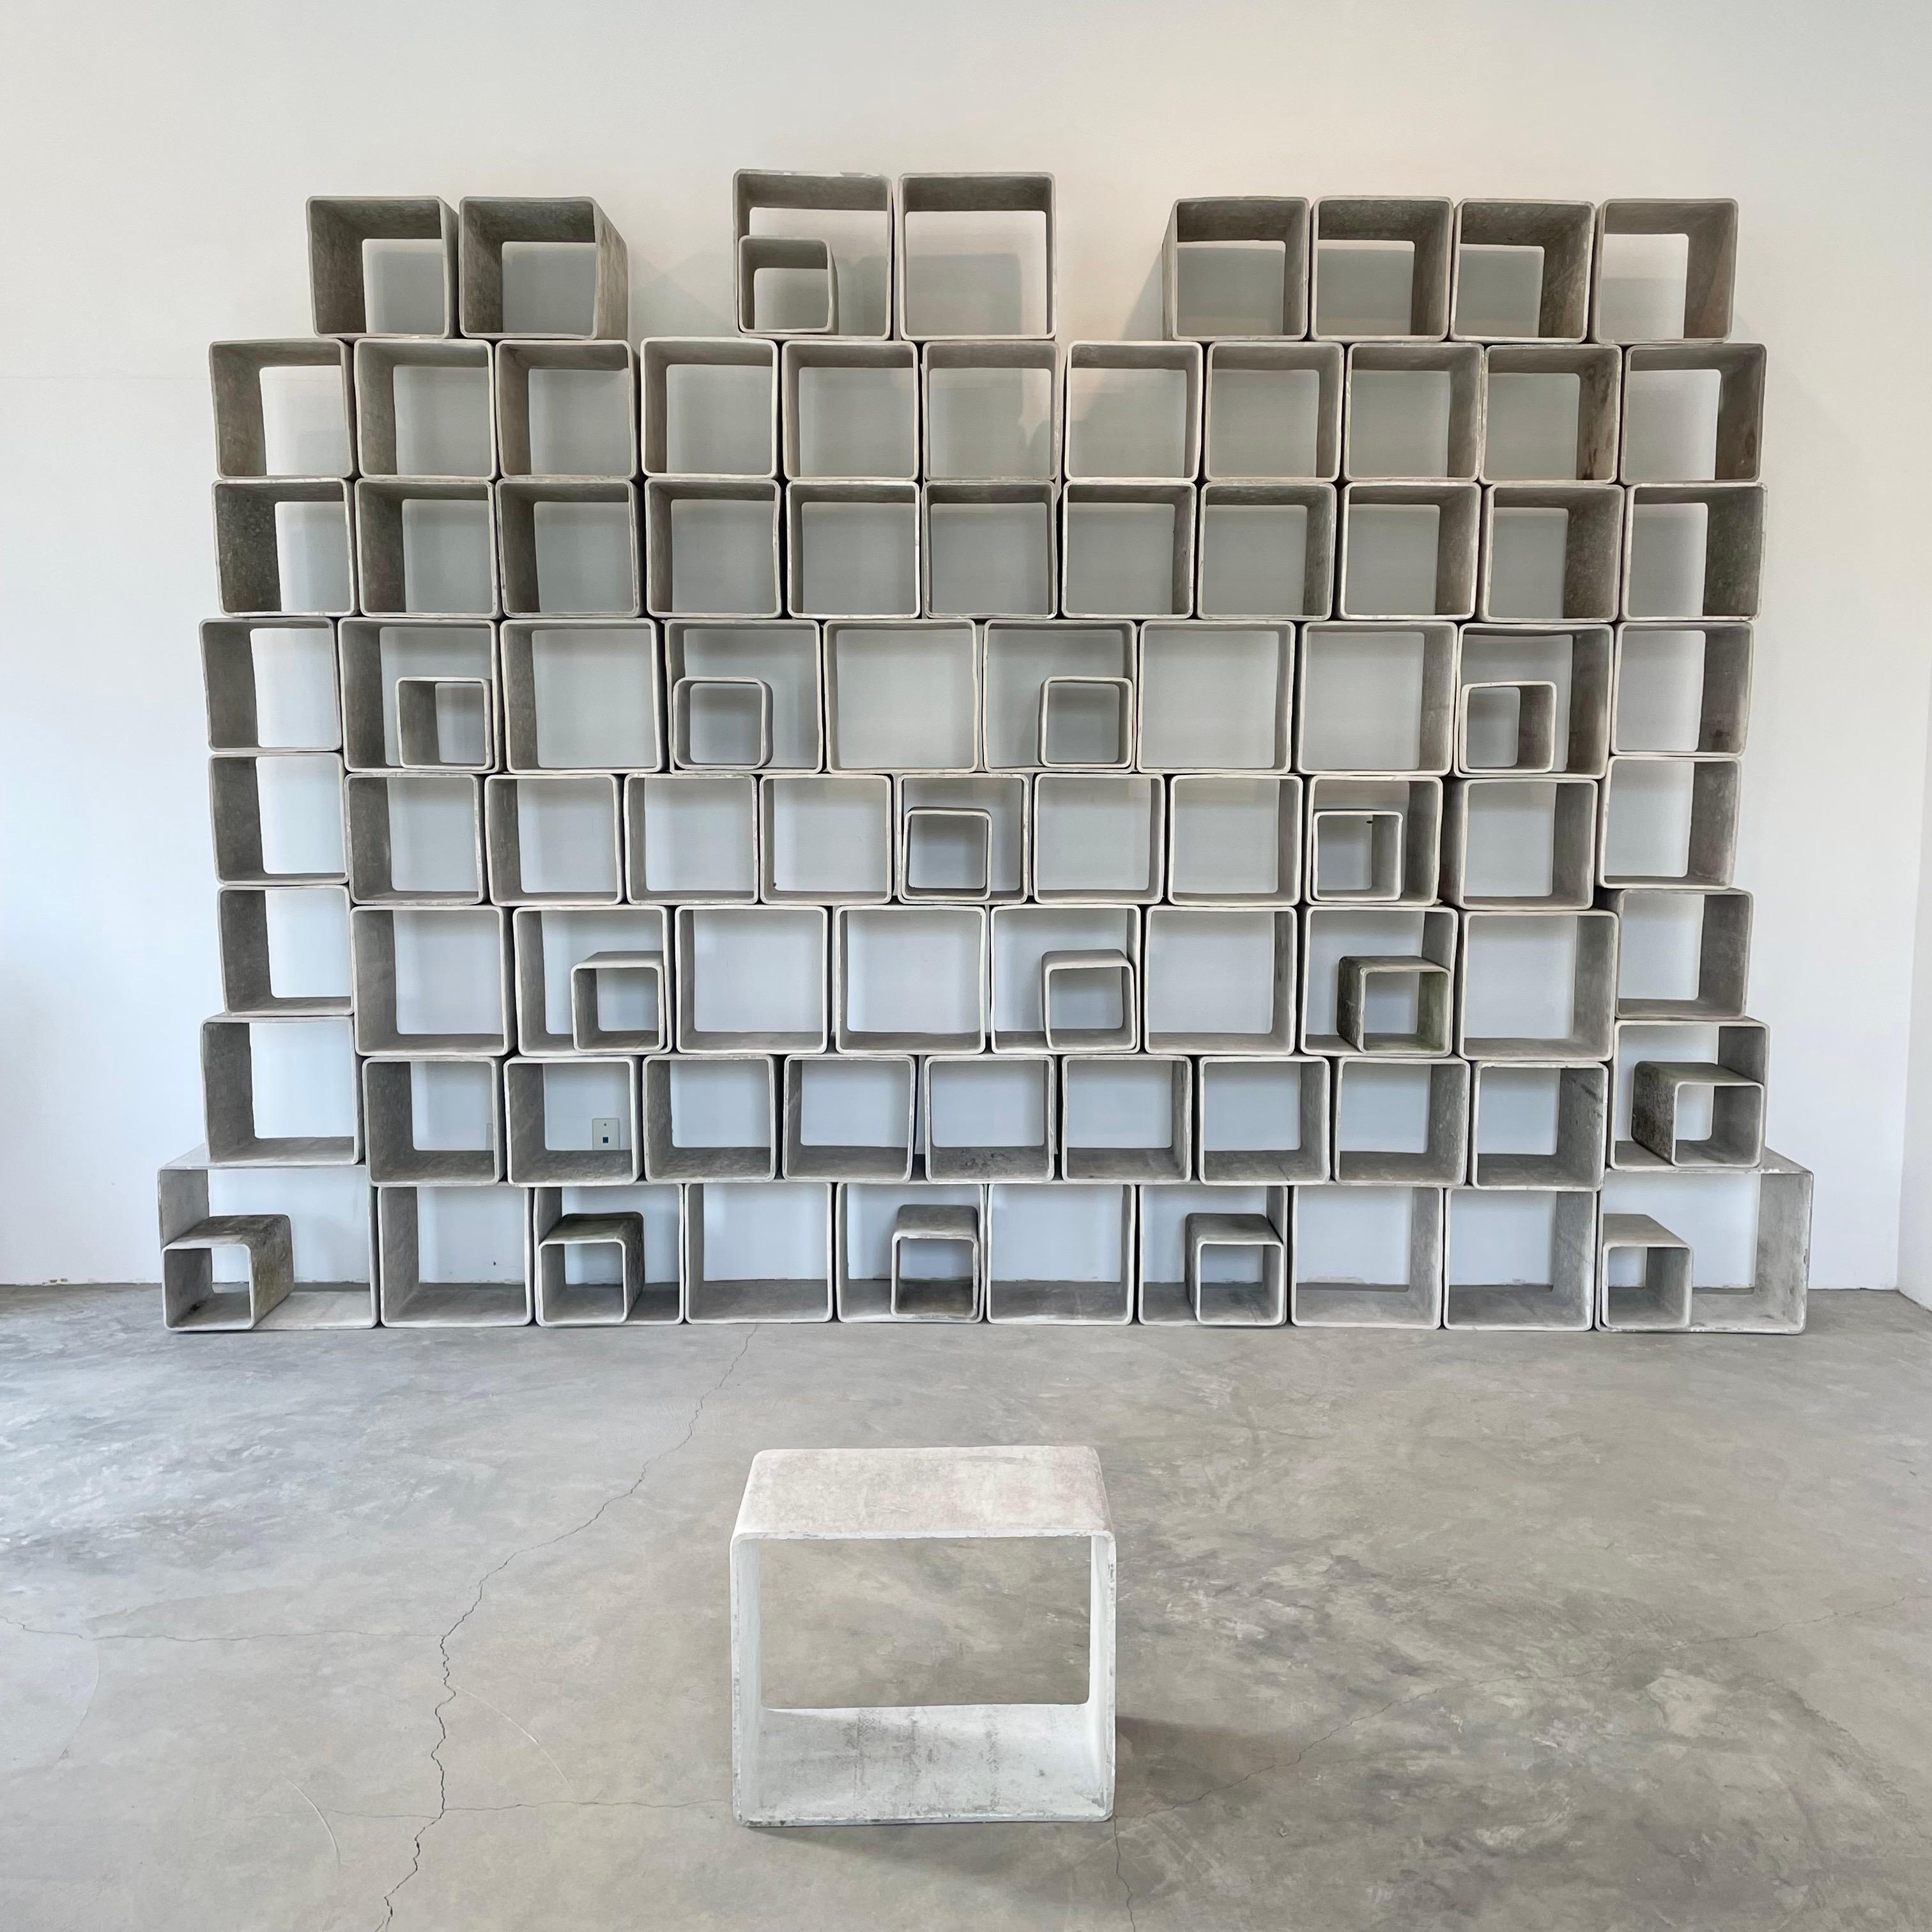 Stunning monumental 100 piece concrete bookcase by Willy Guhl. Made up of 4 different sized hand-made concrete cubes. Completely modular and able to be arranged in a multitude of ways. Original concrete color. Some slight patina or light paint.